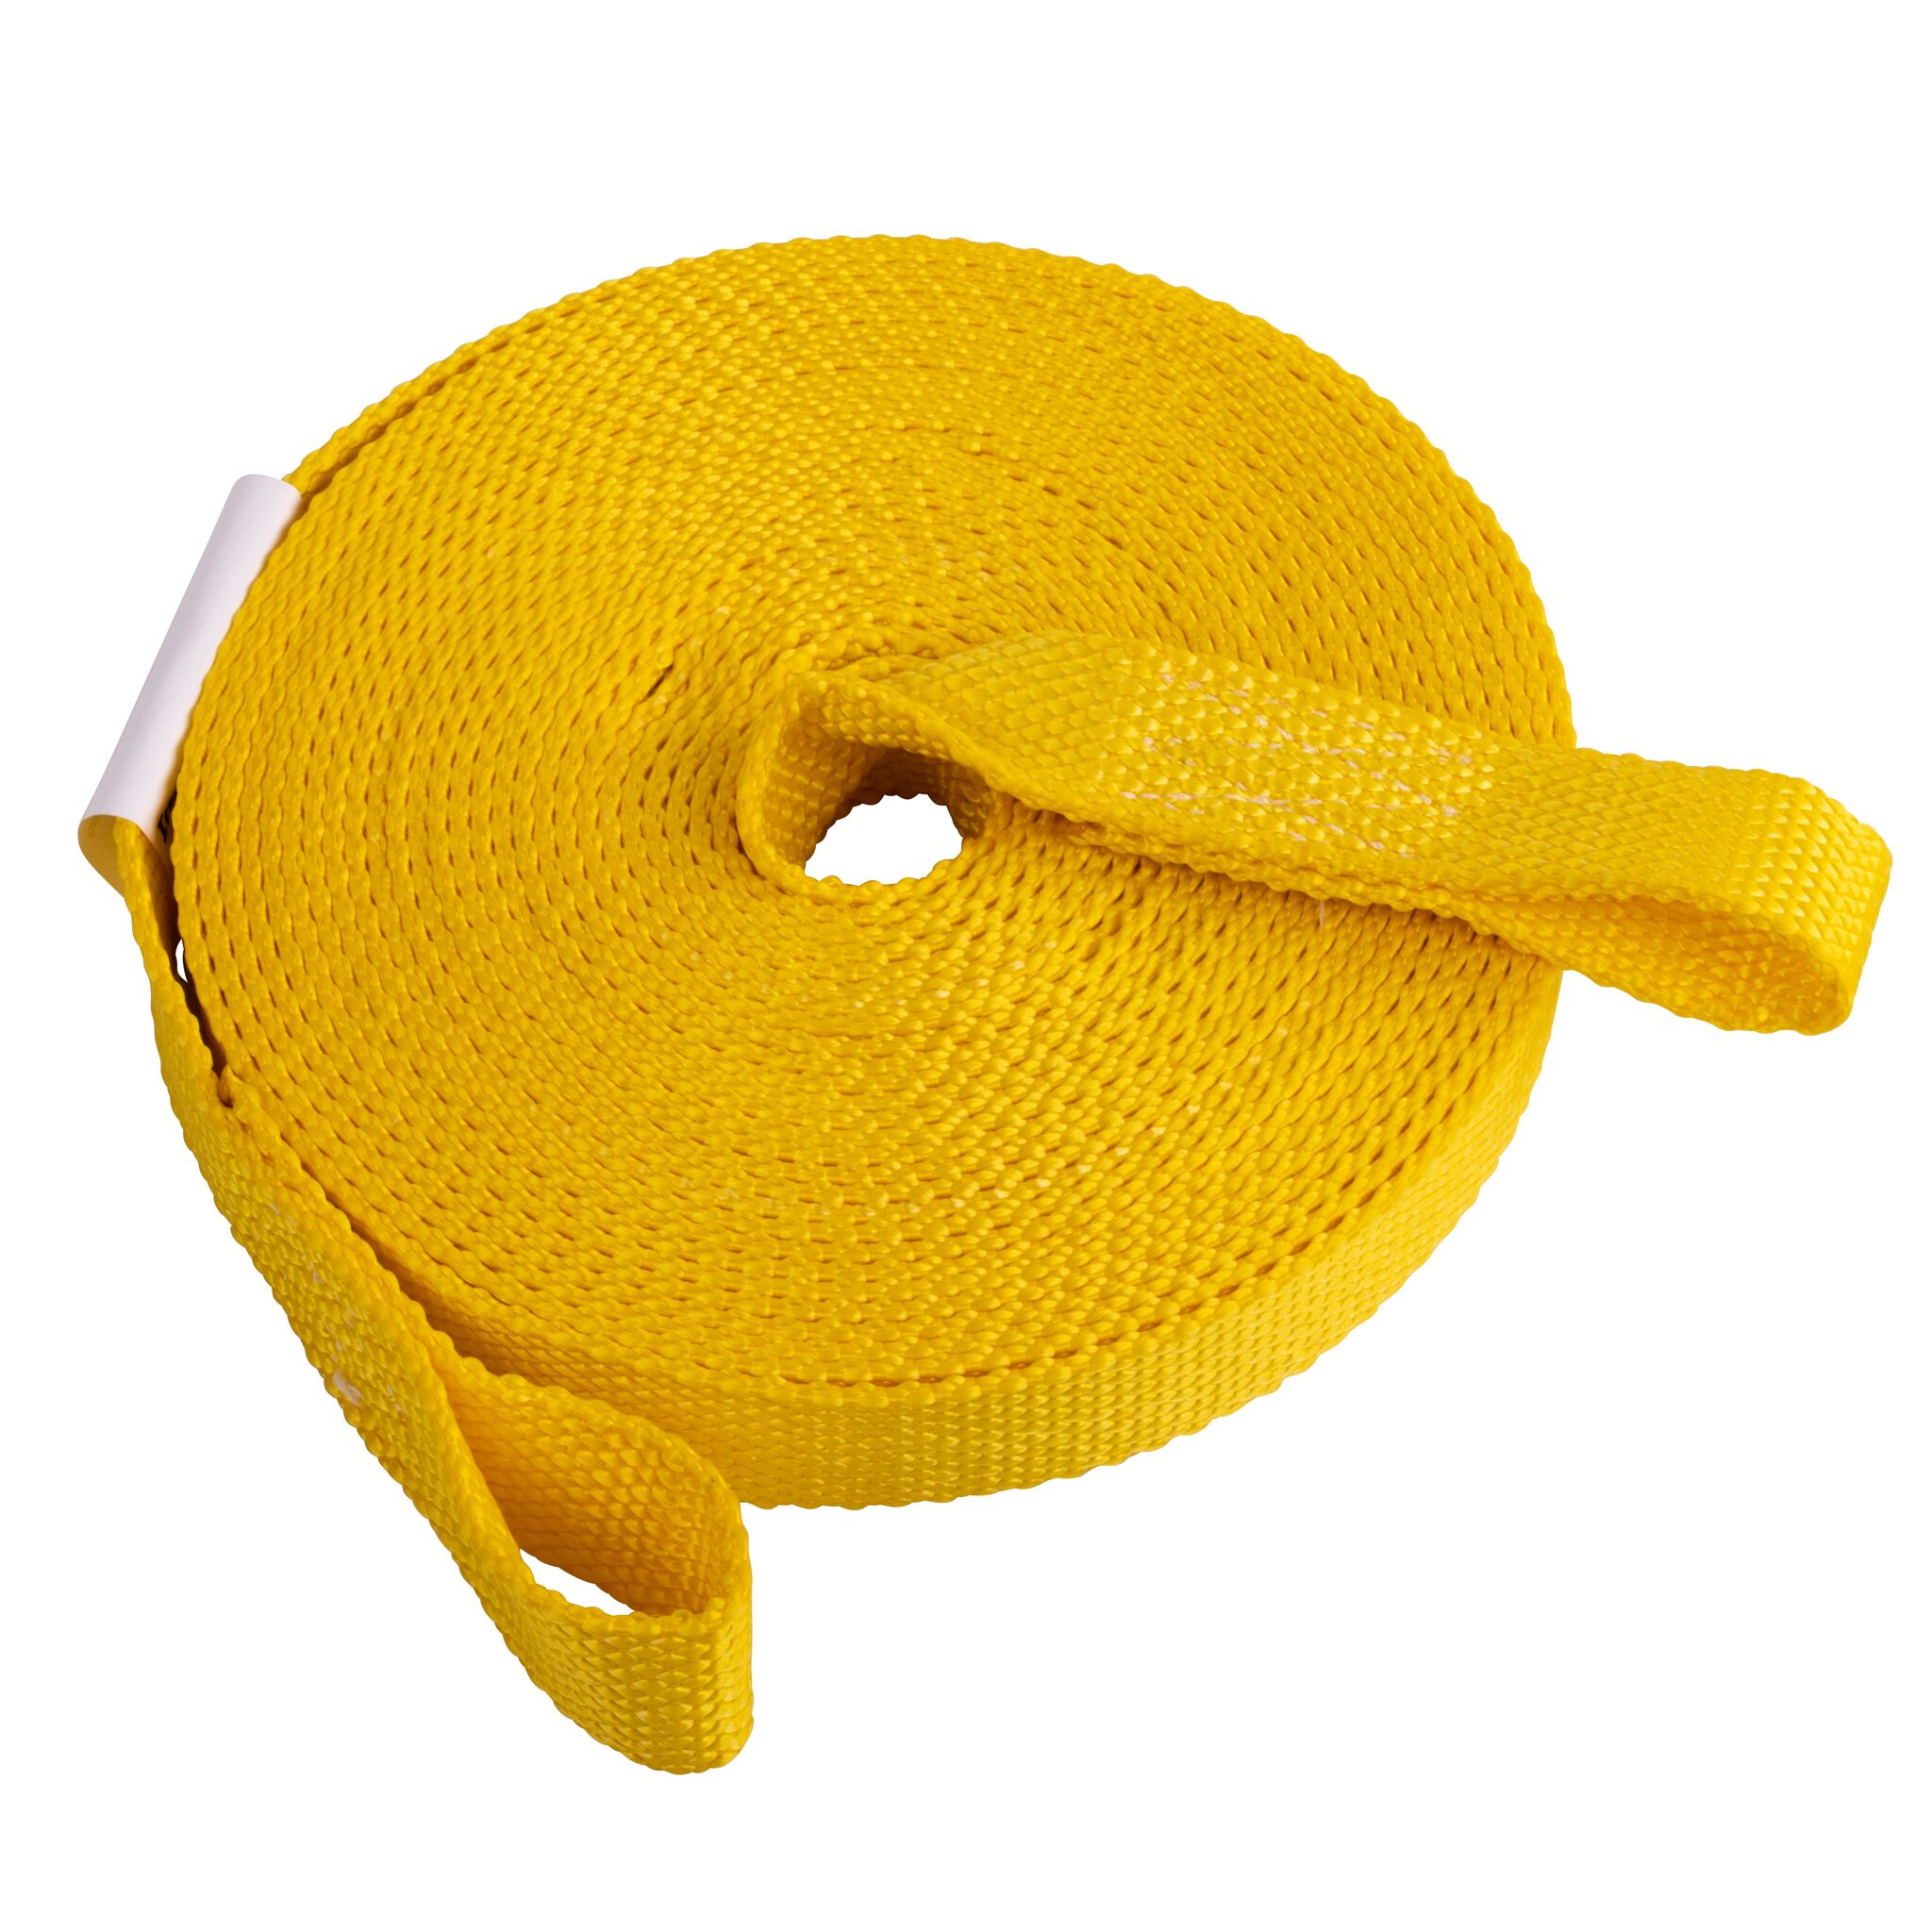 PLASTIMO Stretch rope - safety tape for lifelines